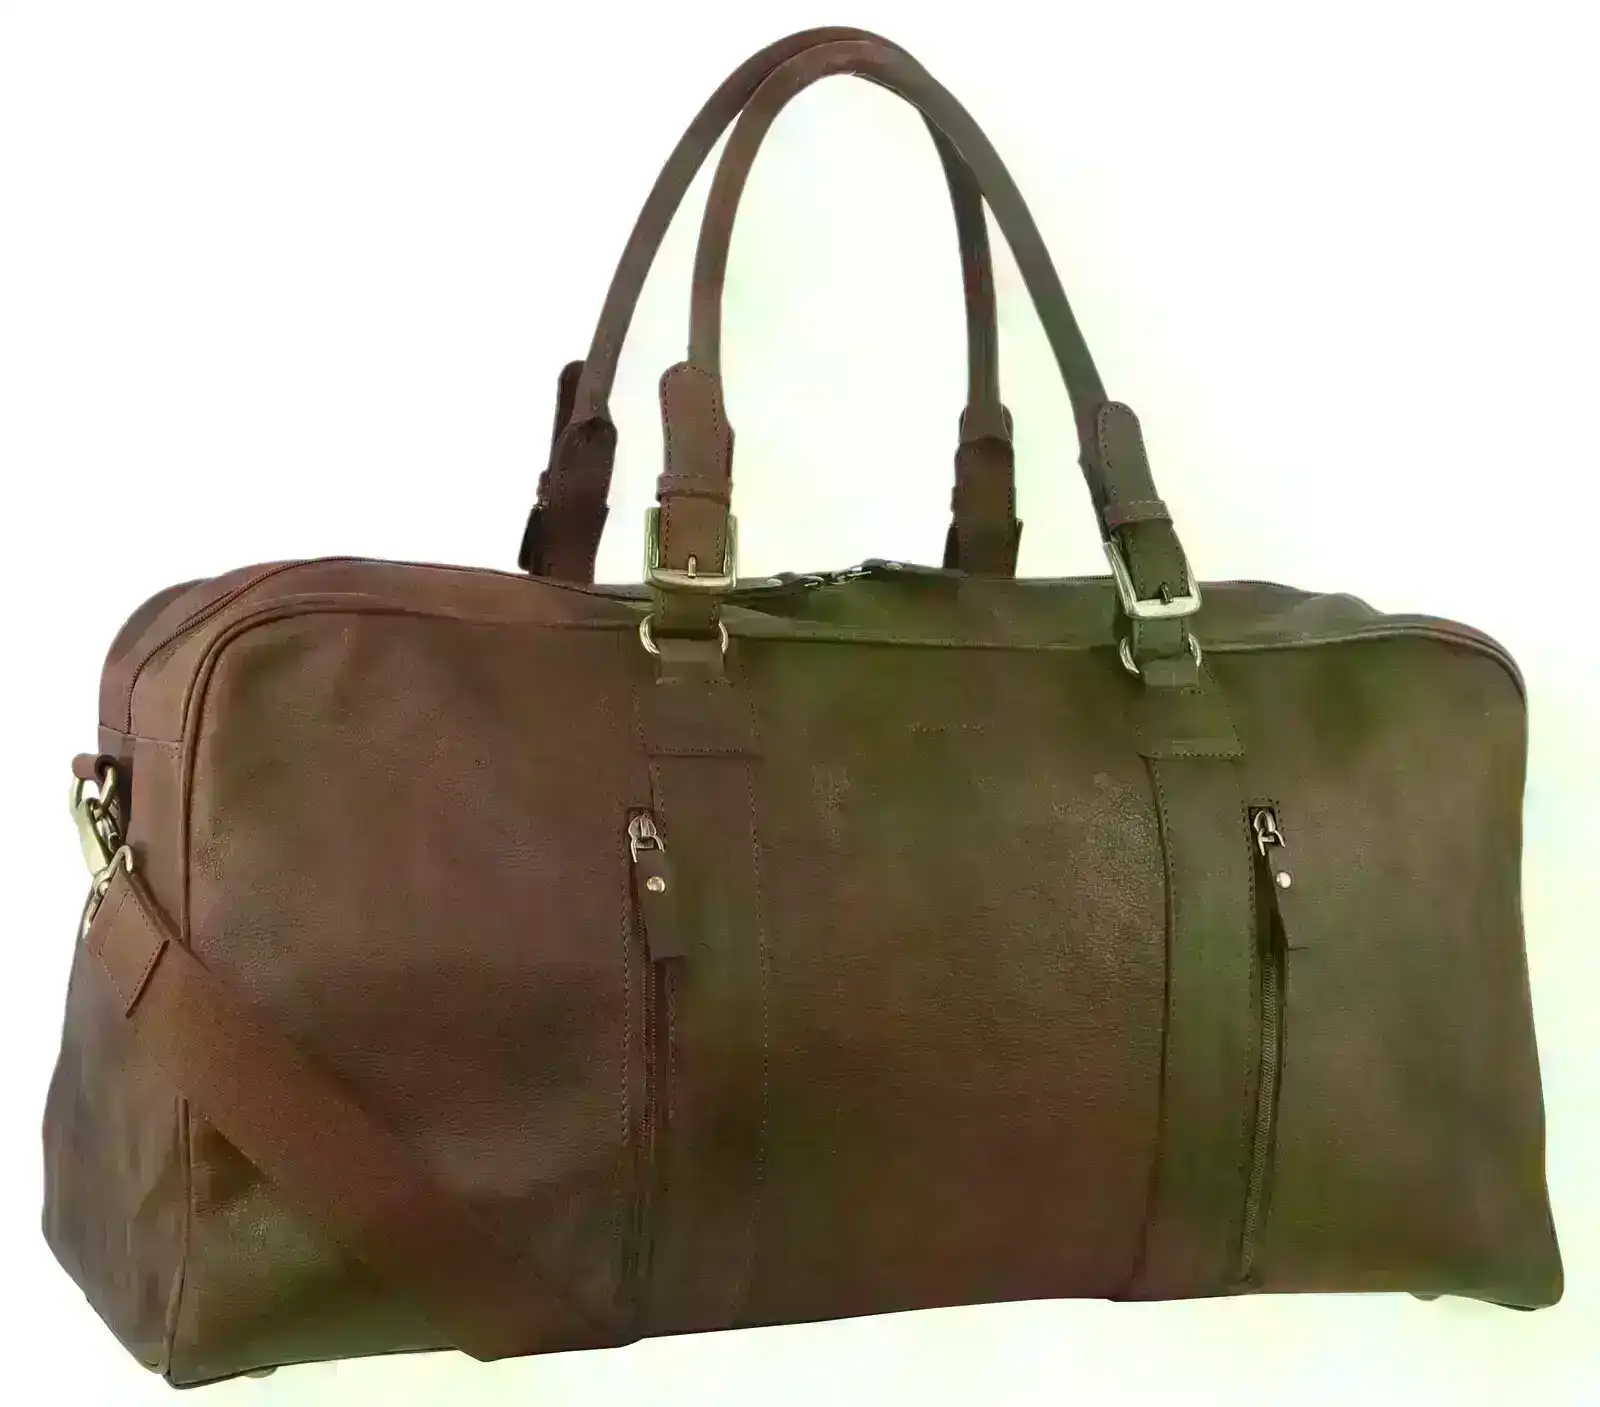 Pierre Cardin Rustic Leather Travel Business Trip Bag Overnight - Chocolate